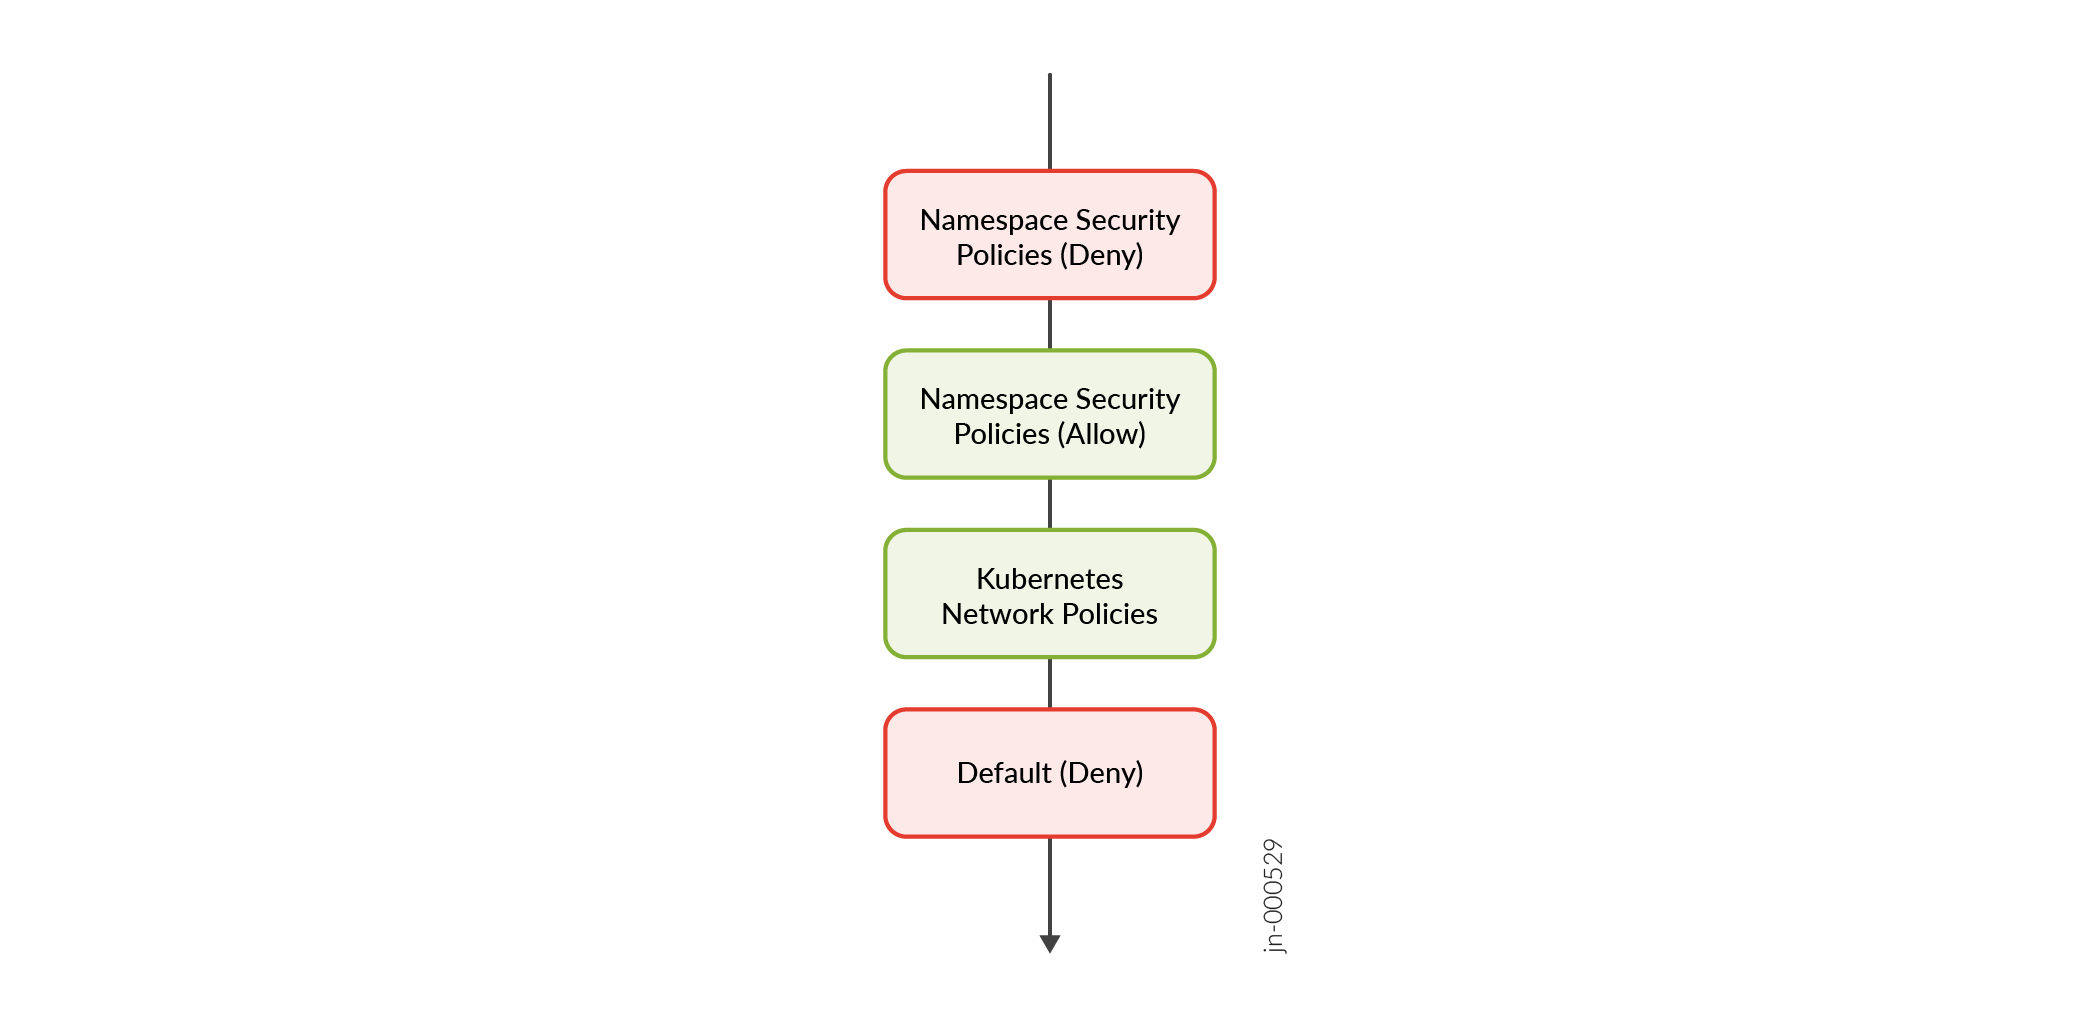 Policy Priority: Namespace Security Polices and Kubernetes Network Policies